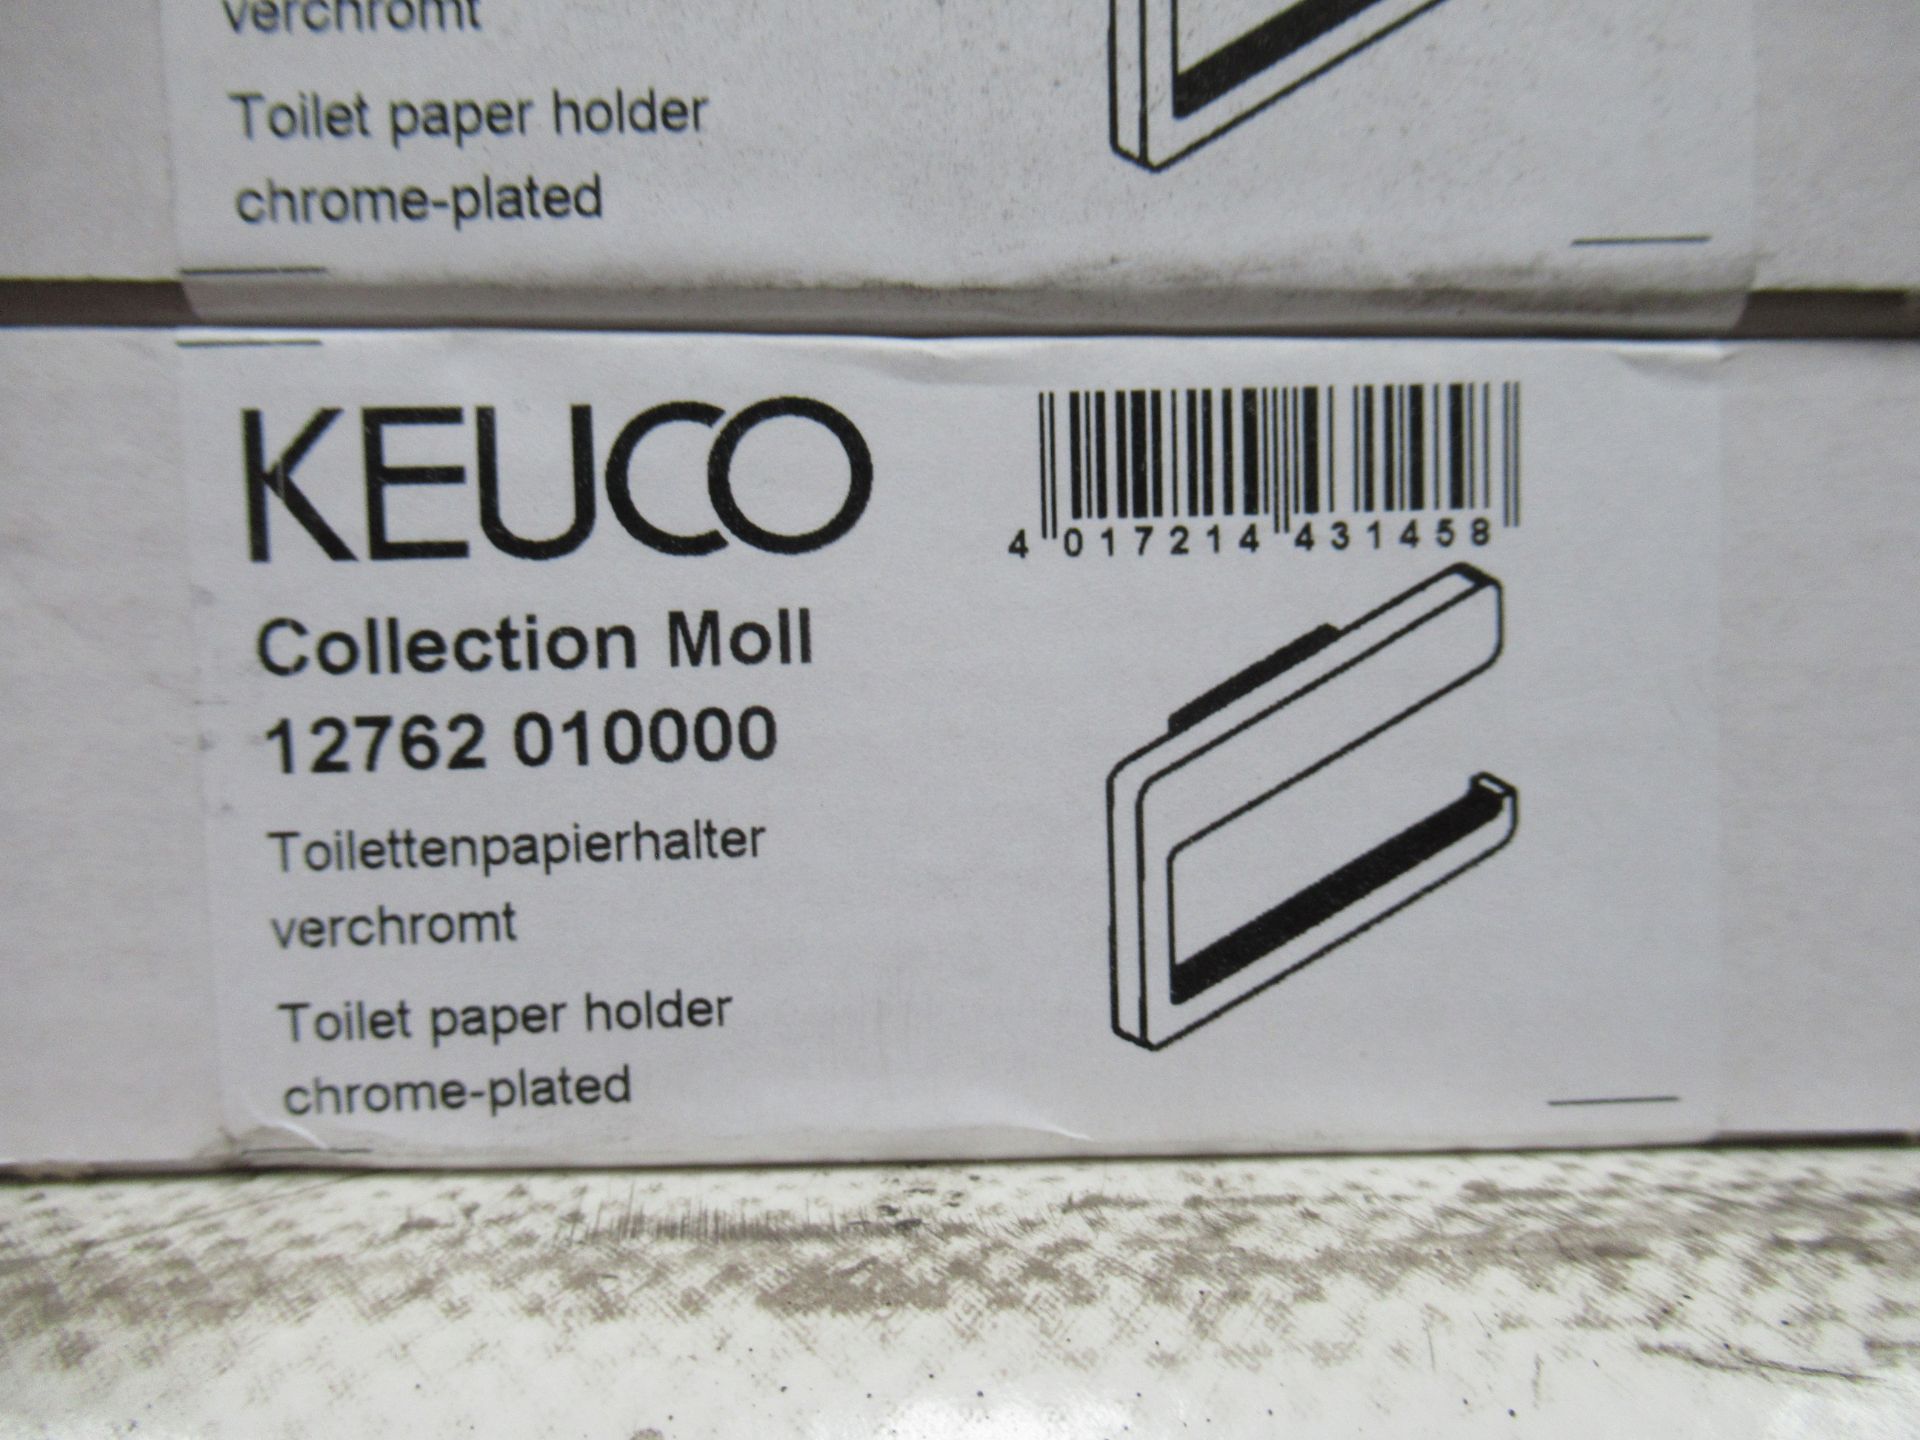 4 x Keuco Collection Moll Toilet Paper Holders Chrome Plated, P/N 12762-010000 - Image 2 of 2